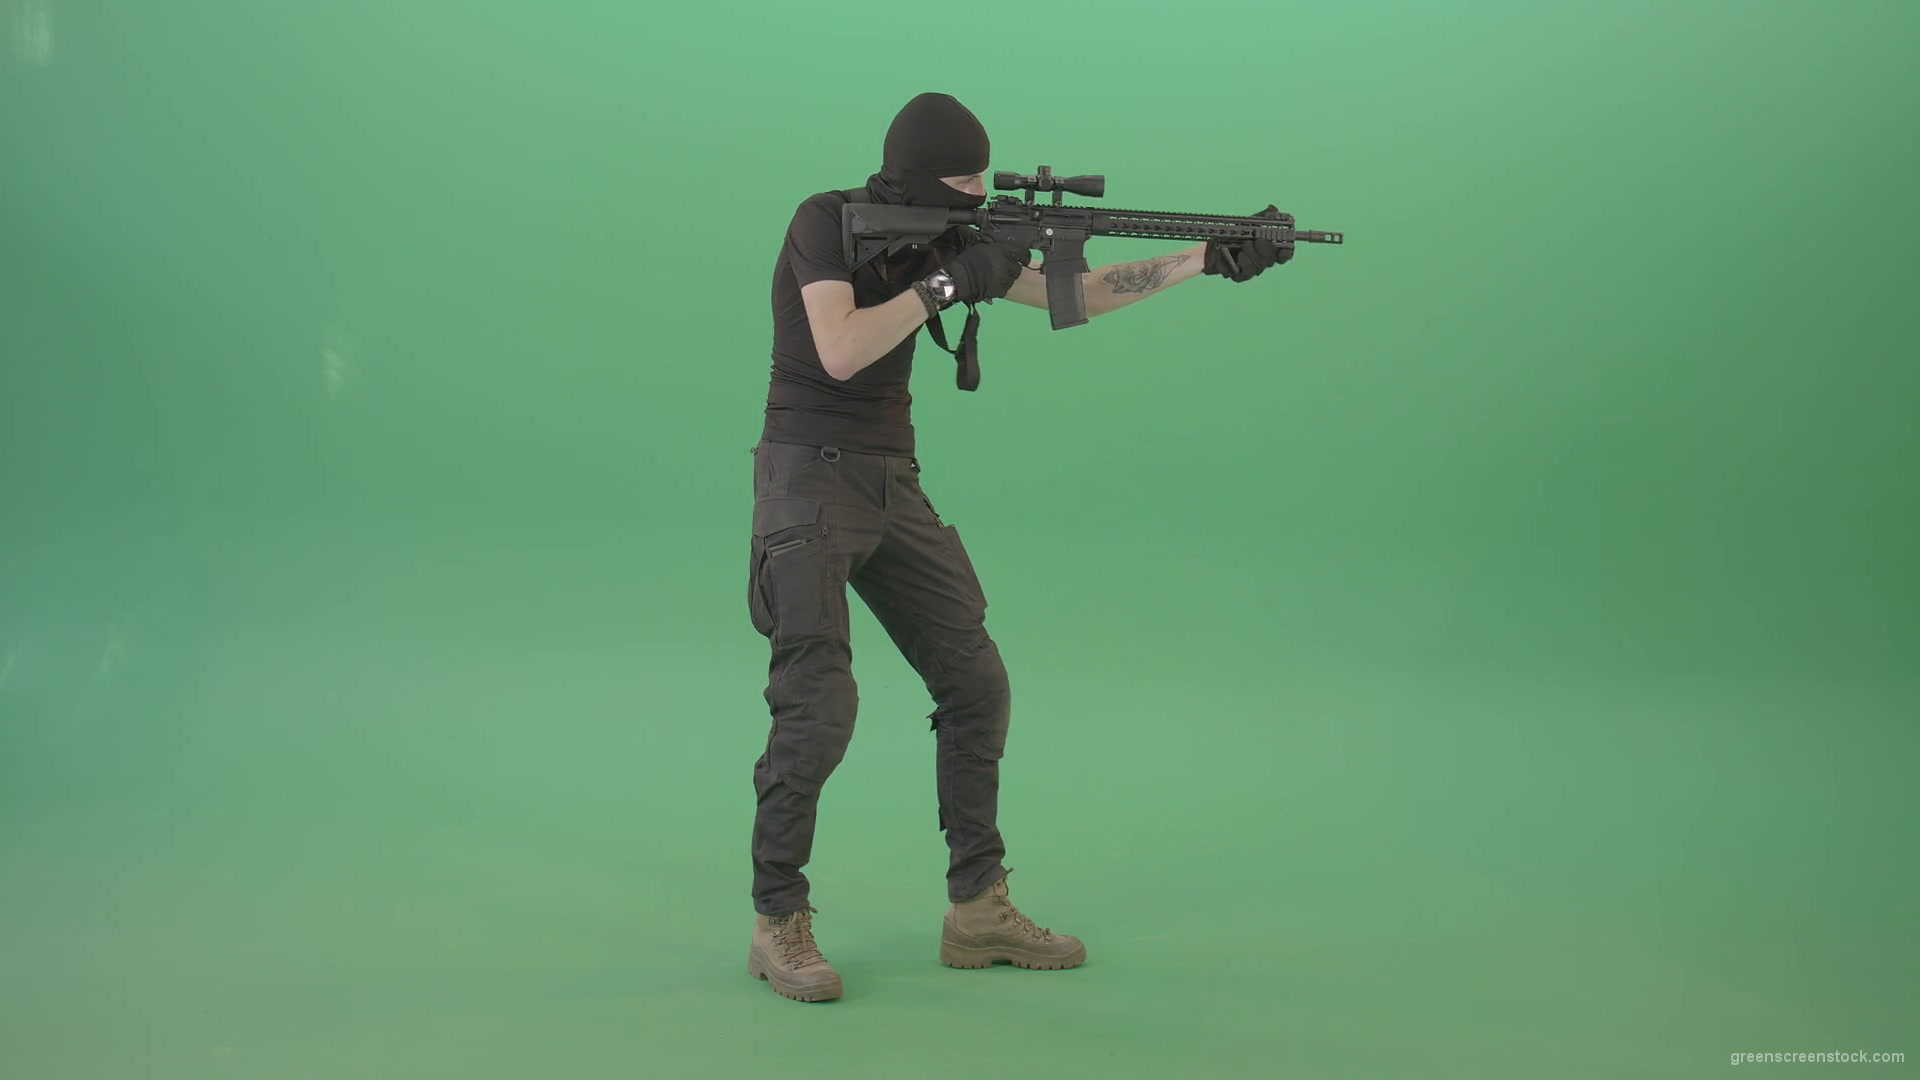 Army-soldier-shooting-with-gun-on-green-screen-4K-Video-Clip-1920_009 Green Screen Stock